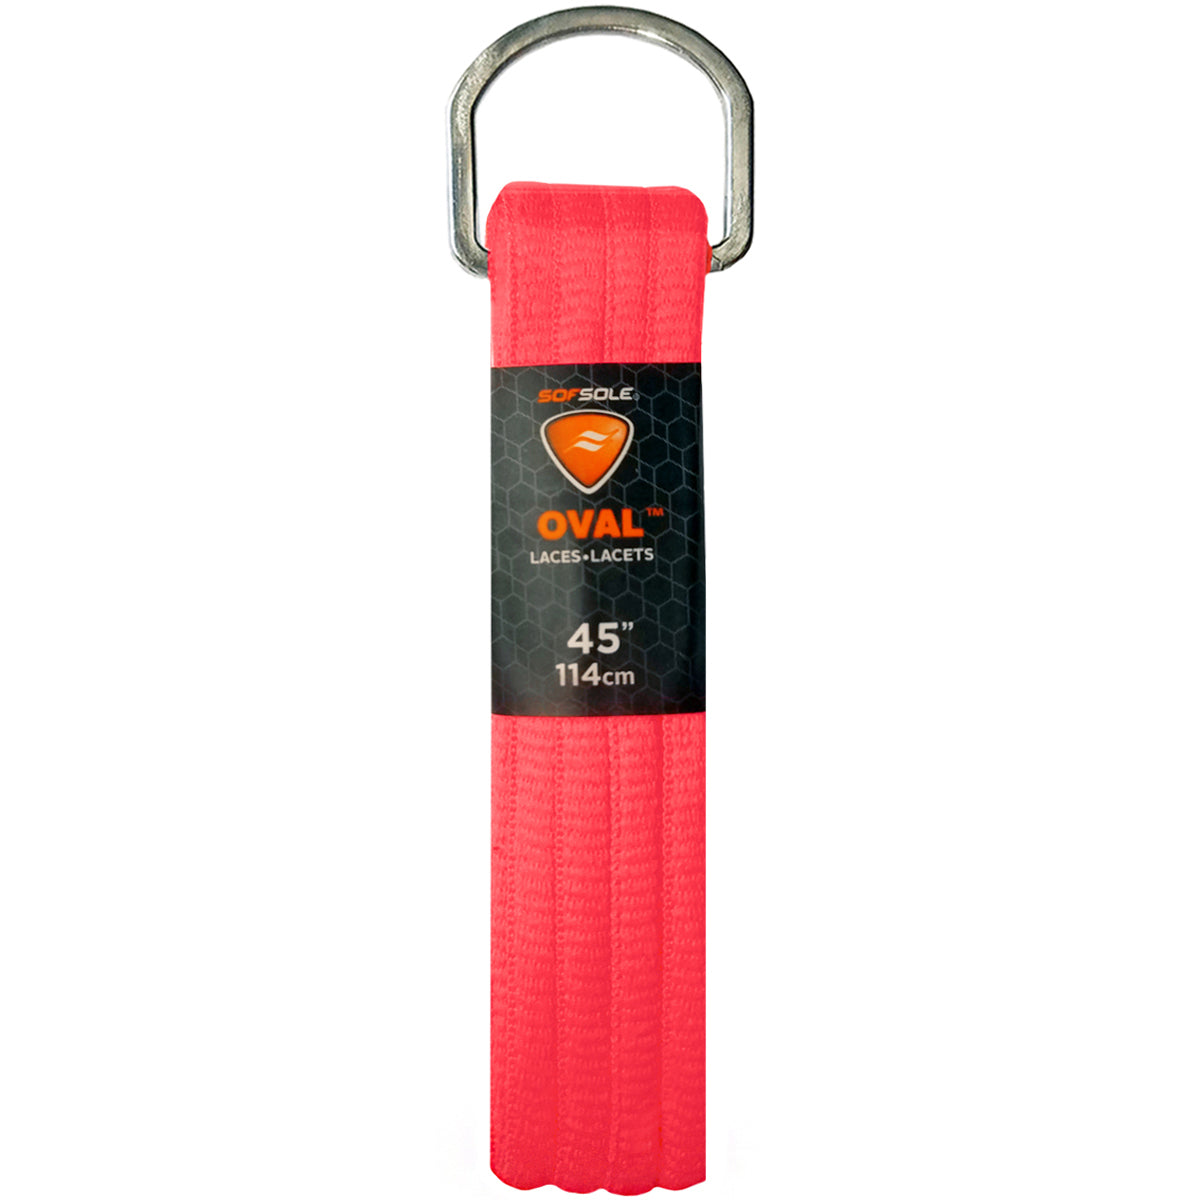 Sof Sole Athletic Oval Shoe Laces SofSole